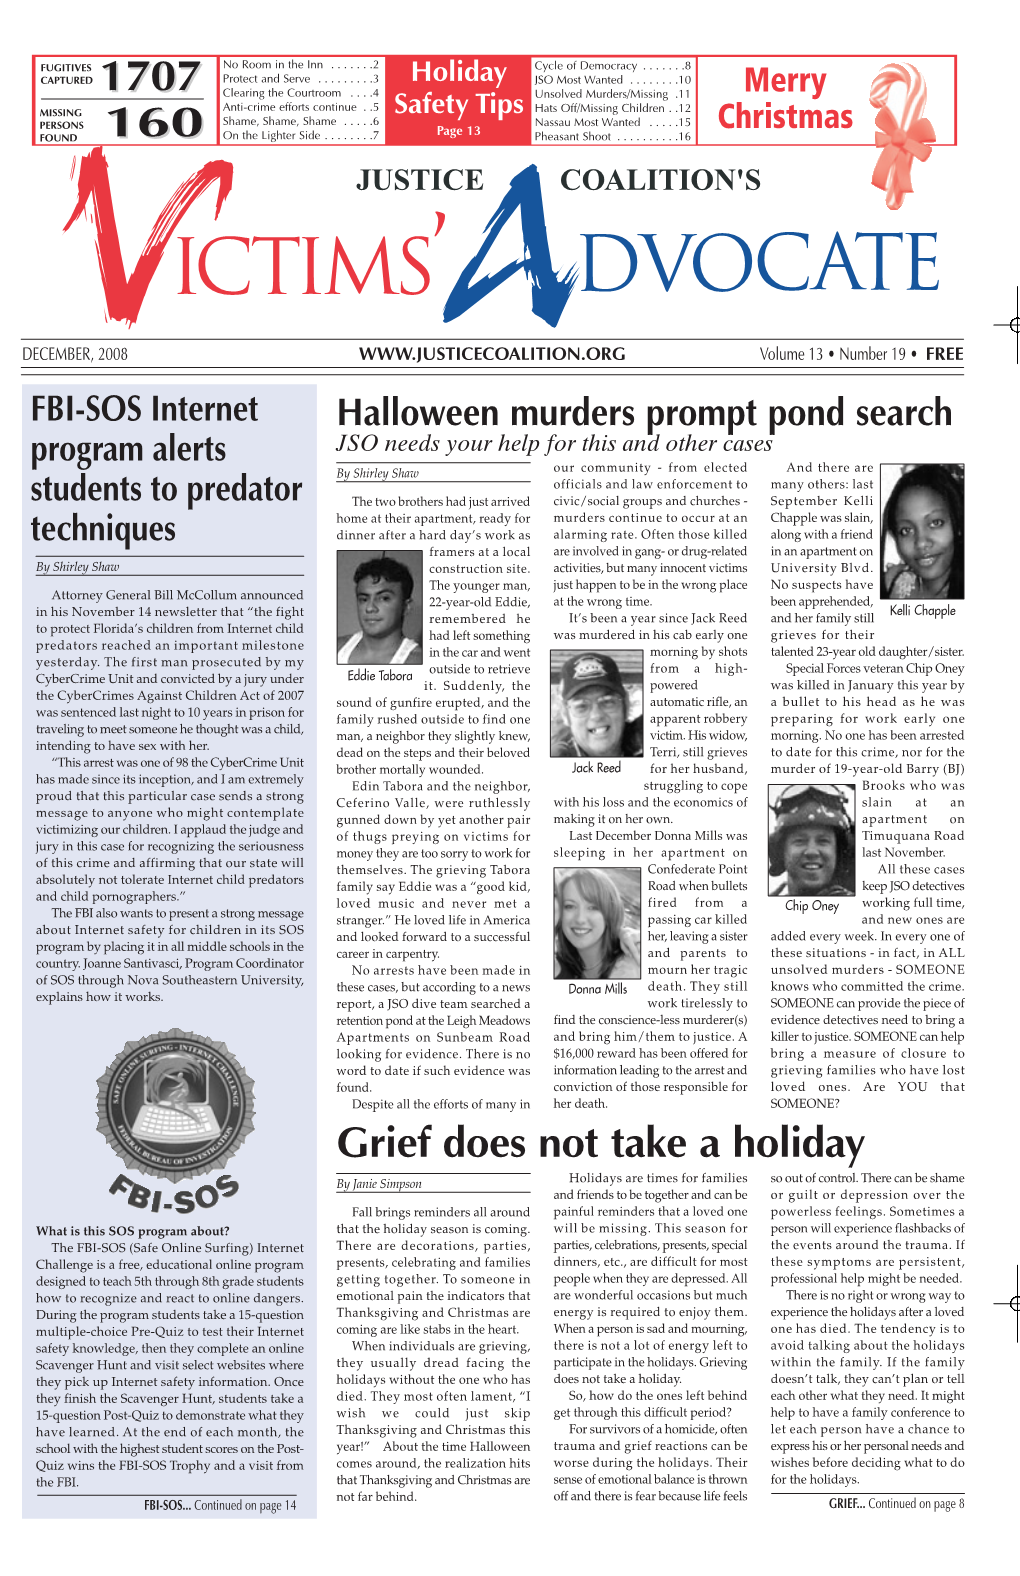 FBI-SOS Featured in the Victims' Advocate December 2008